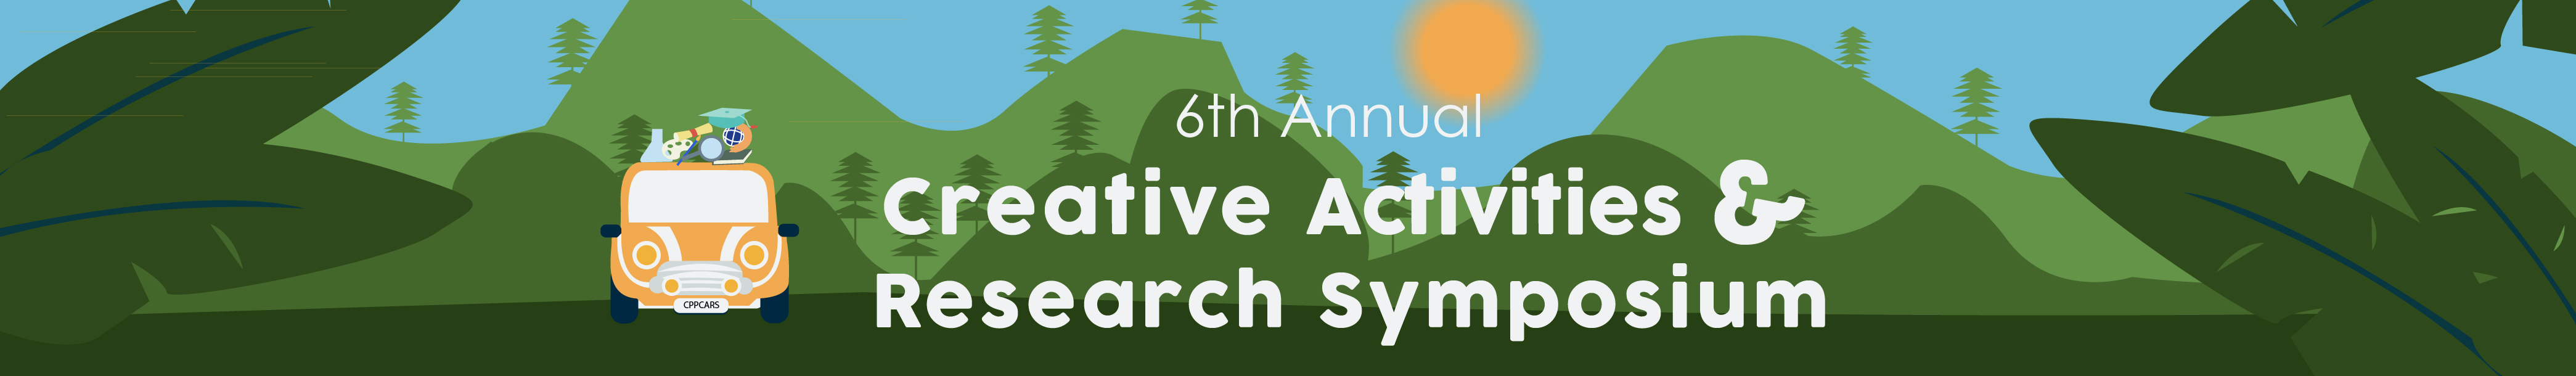 6th Annual Creatives Activities and Research Symposium